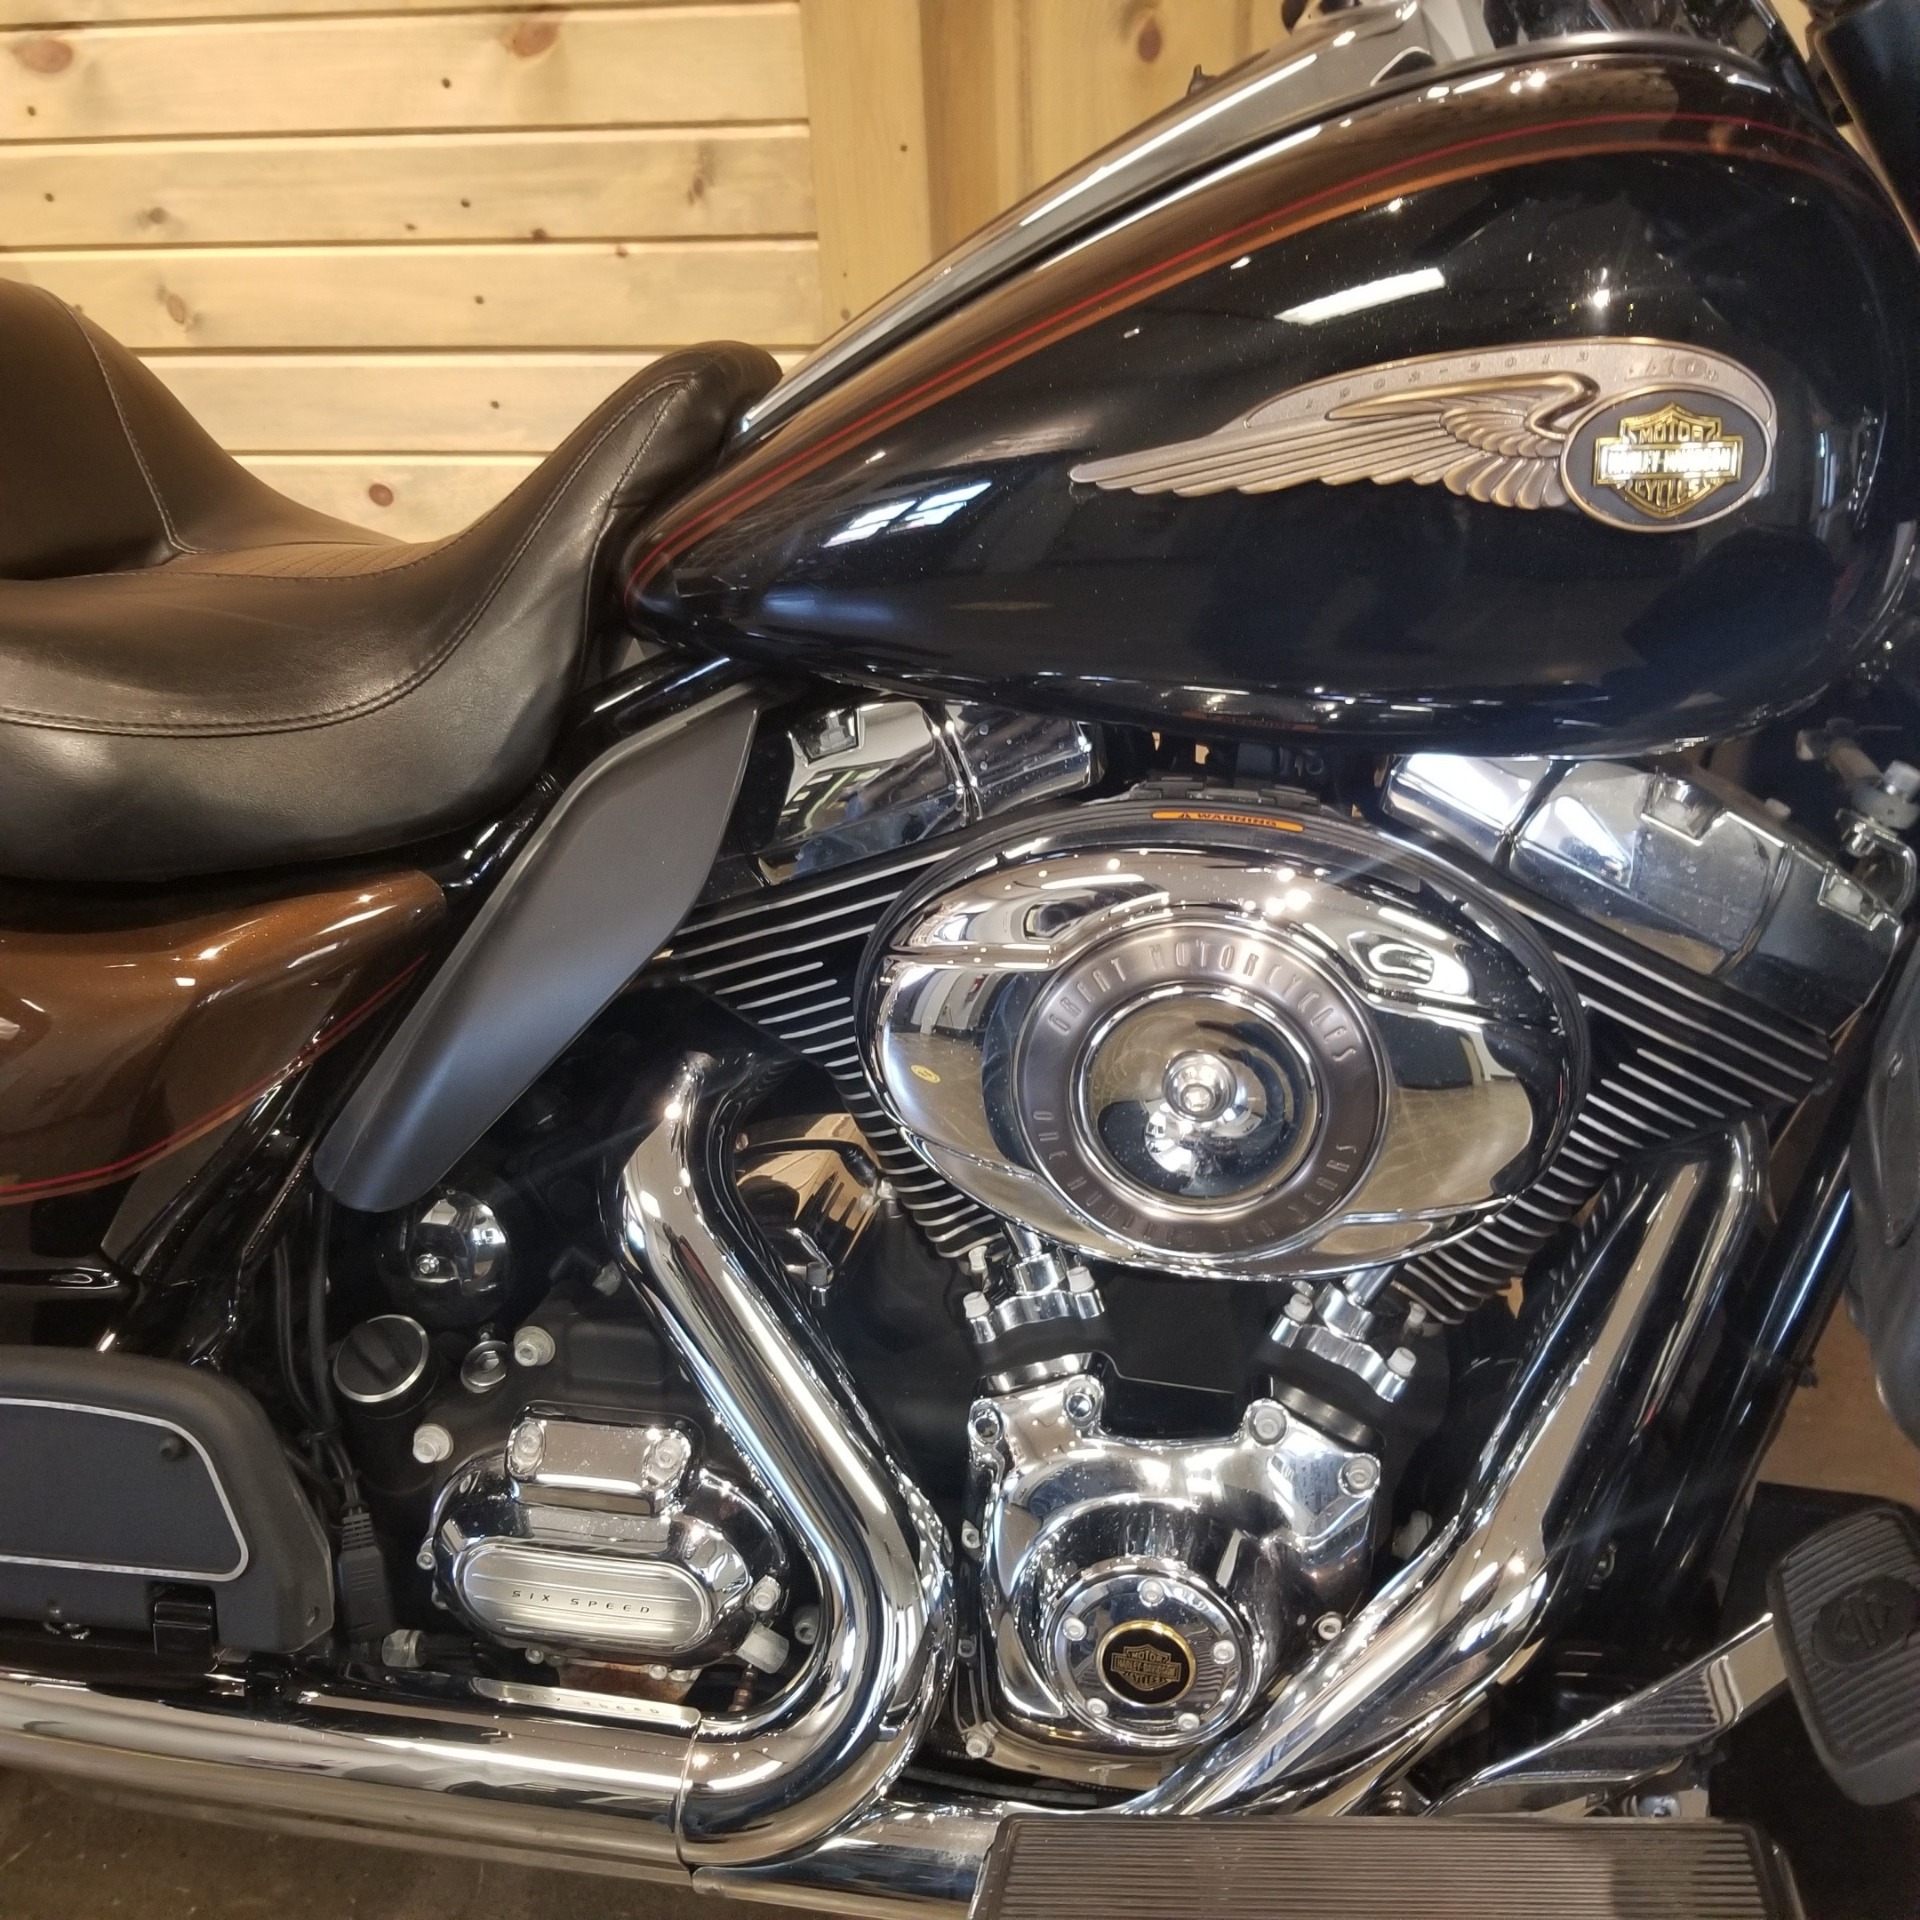 2013 Harley-Davidson Electra Glide® Ultra Limited 110th Anniversary Edition in Mentor, Ohio - Photo 2